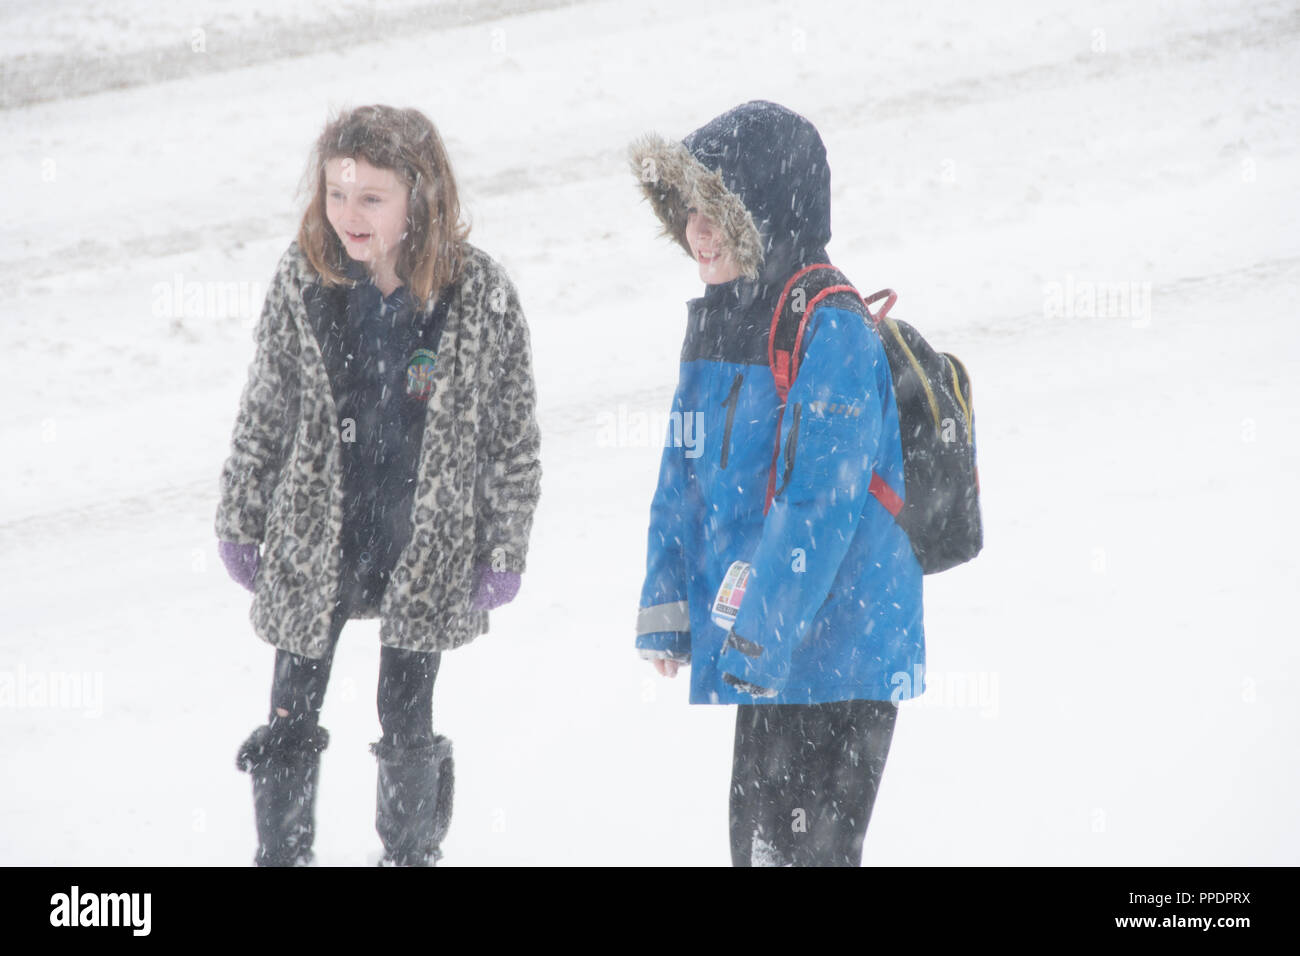 Sheffield, UK – 28 Feb 2018: Playing in the snow: brother and sister play outdoors in a blizzard as The Beast from the East grips Sheffield in freezin Stock Photo